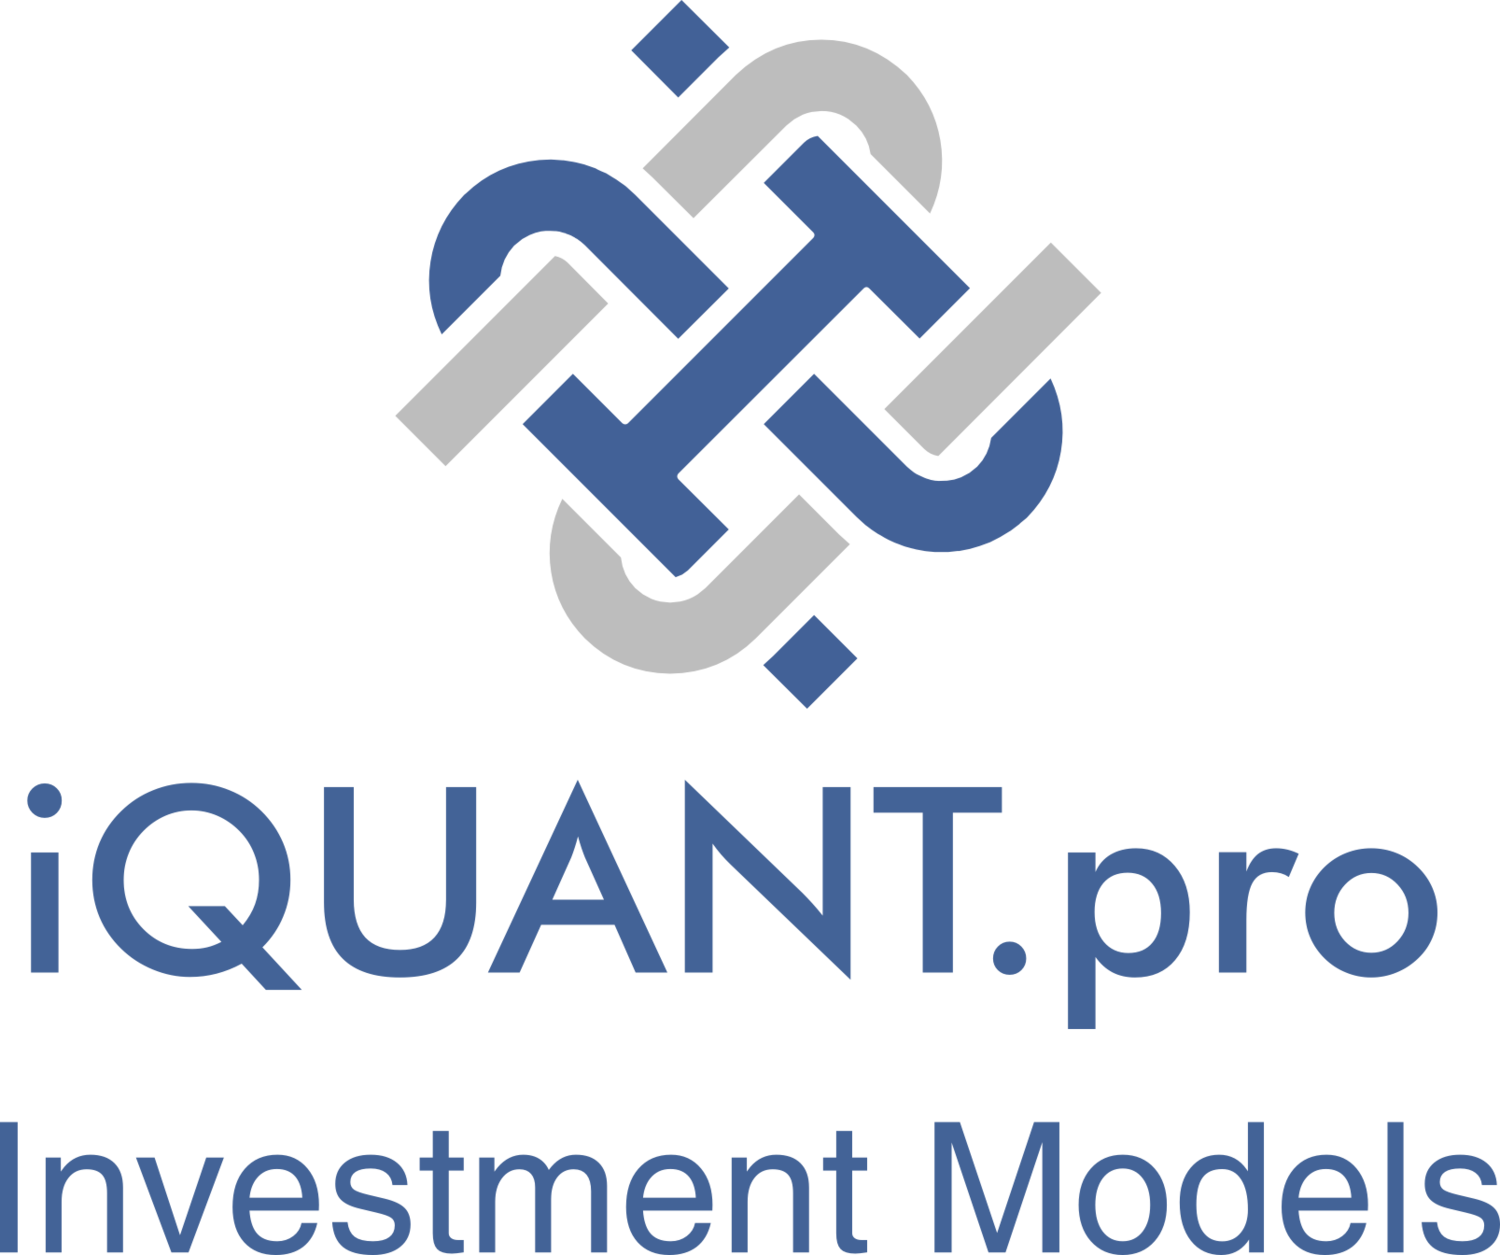 iQUANT.pro